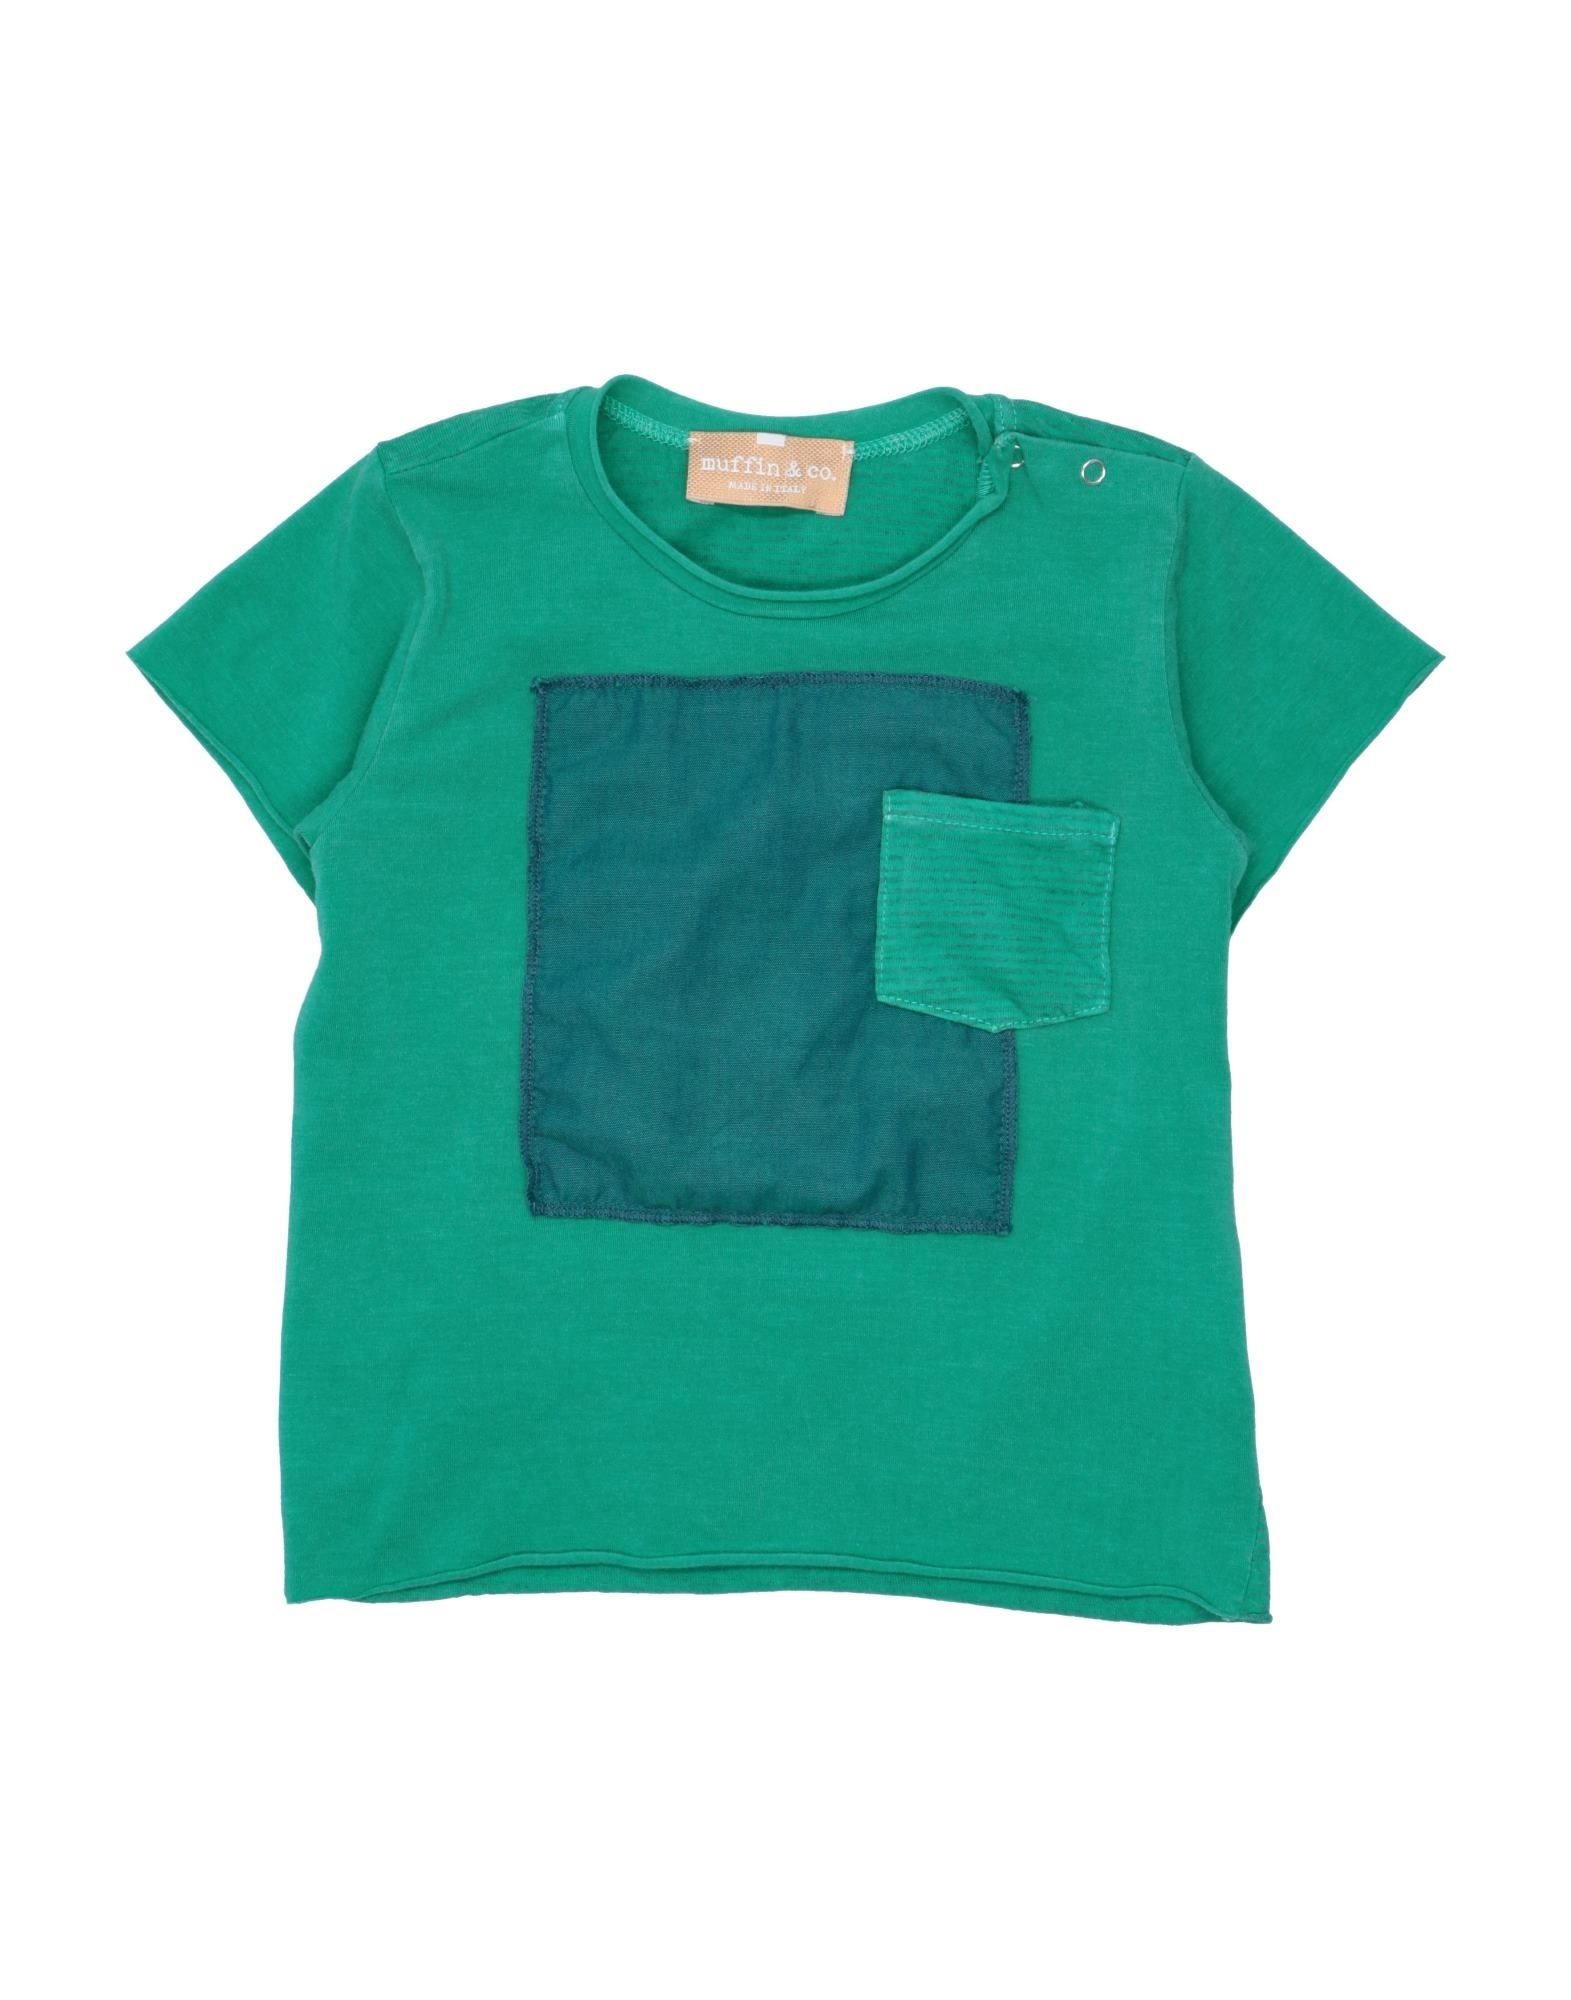 Muffin & Co. Kids' T-shirts In Green